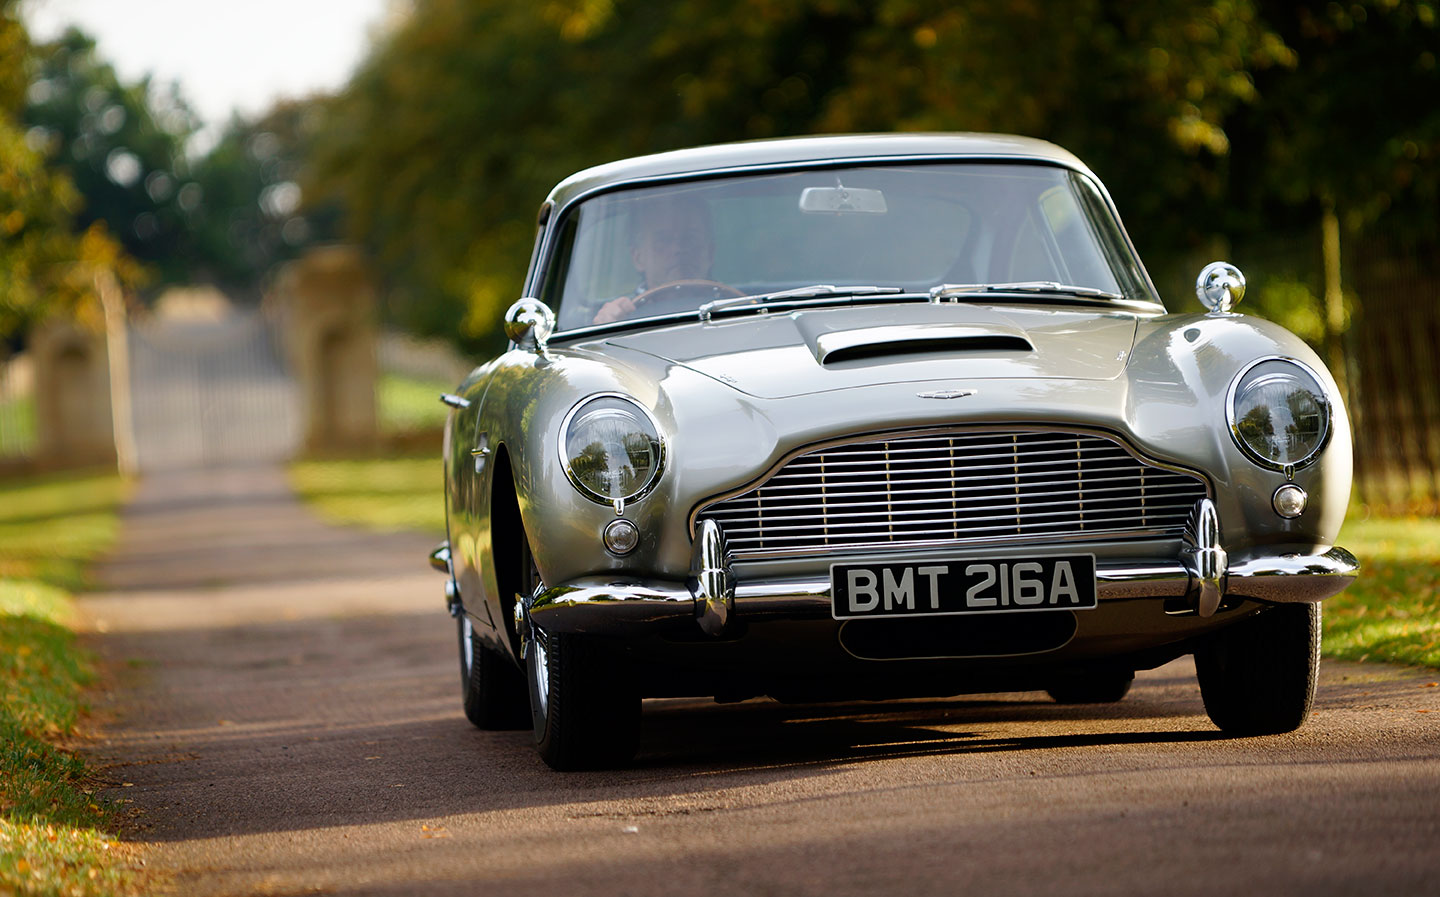 Classic car hire now offered through AirBnB